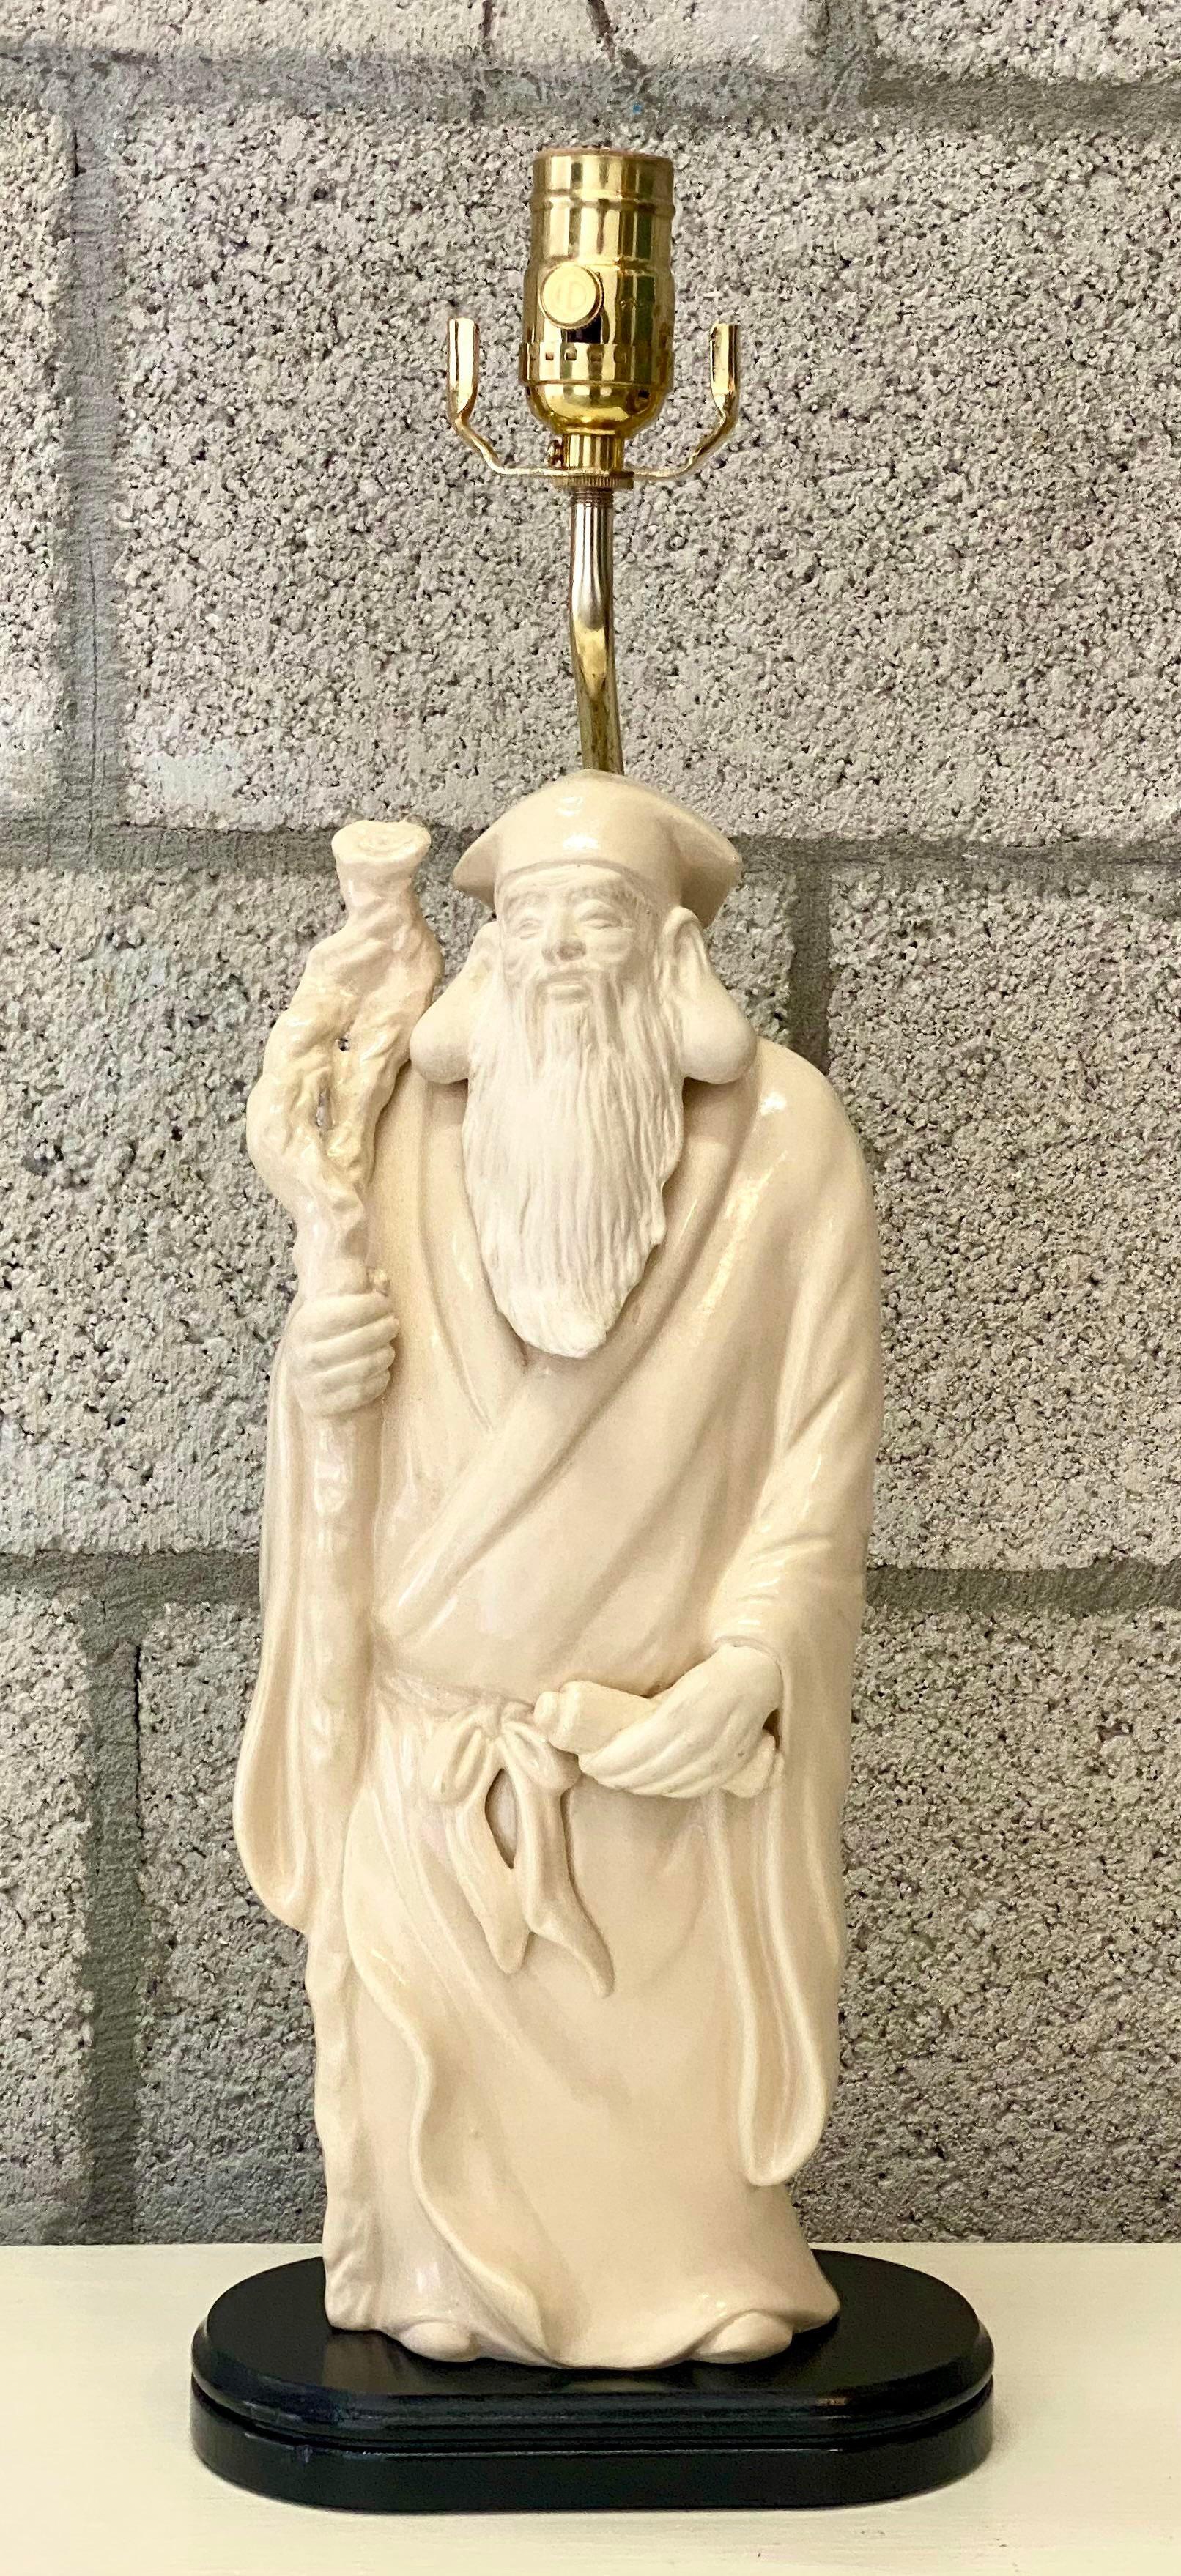 Outstanding vintage matte ceramic table lamp. One of the Asian Immortals. A wise looking elder with a long flowing beard. Rests on a black wooden plinth. Completely restored by Heath of Palm Beach. All new hardware and wiring. Acquired from a Palm